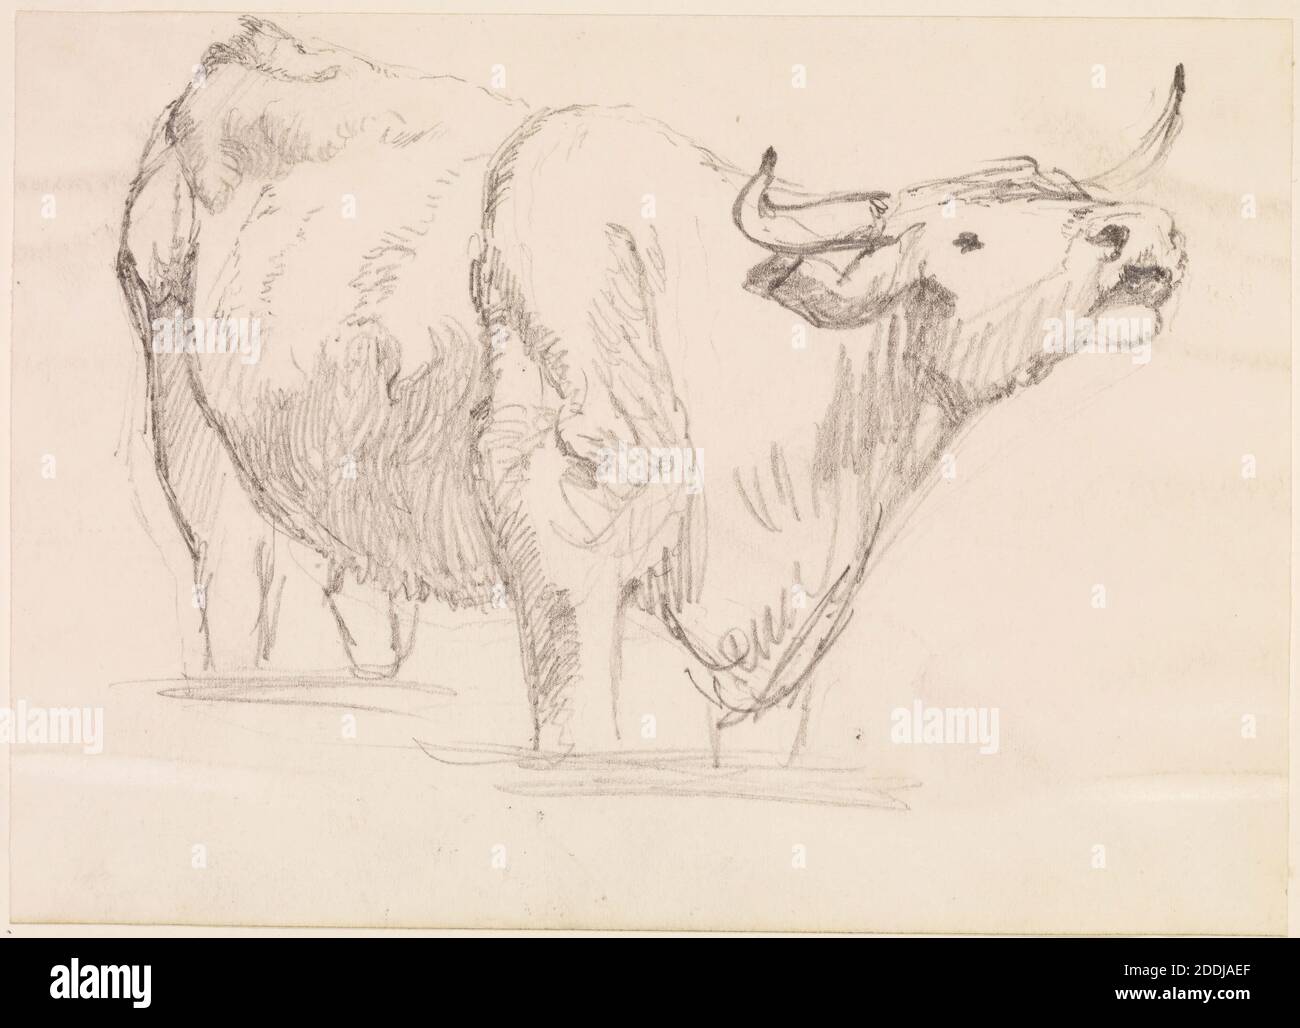 Study of a Cow, 1857-58 Frederick Sandys, Art Movement, Pre-Raphaelite, Drawing, Pencil, Sketch, Animal, Cow, Study, Works on Paper Stock Photo